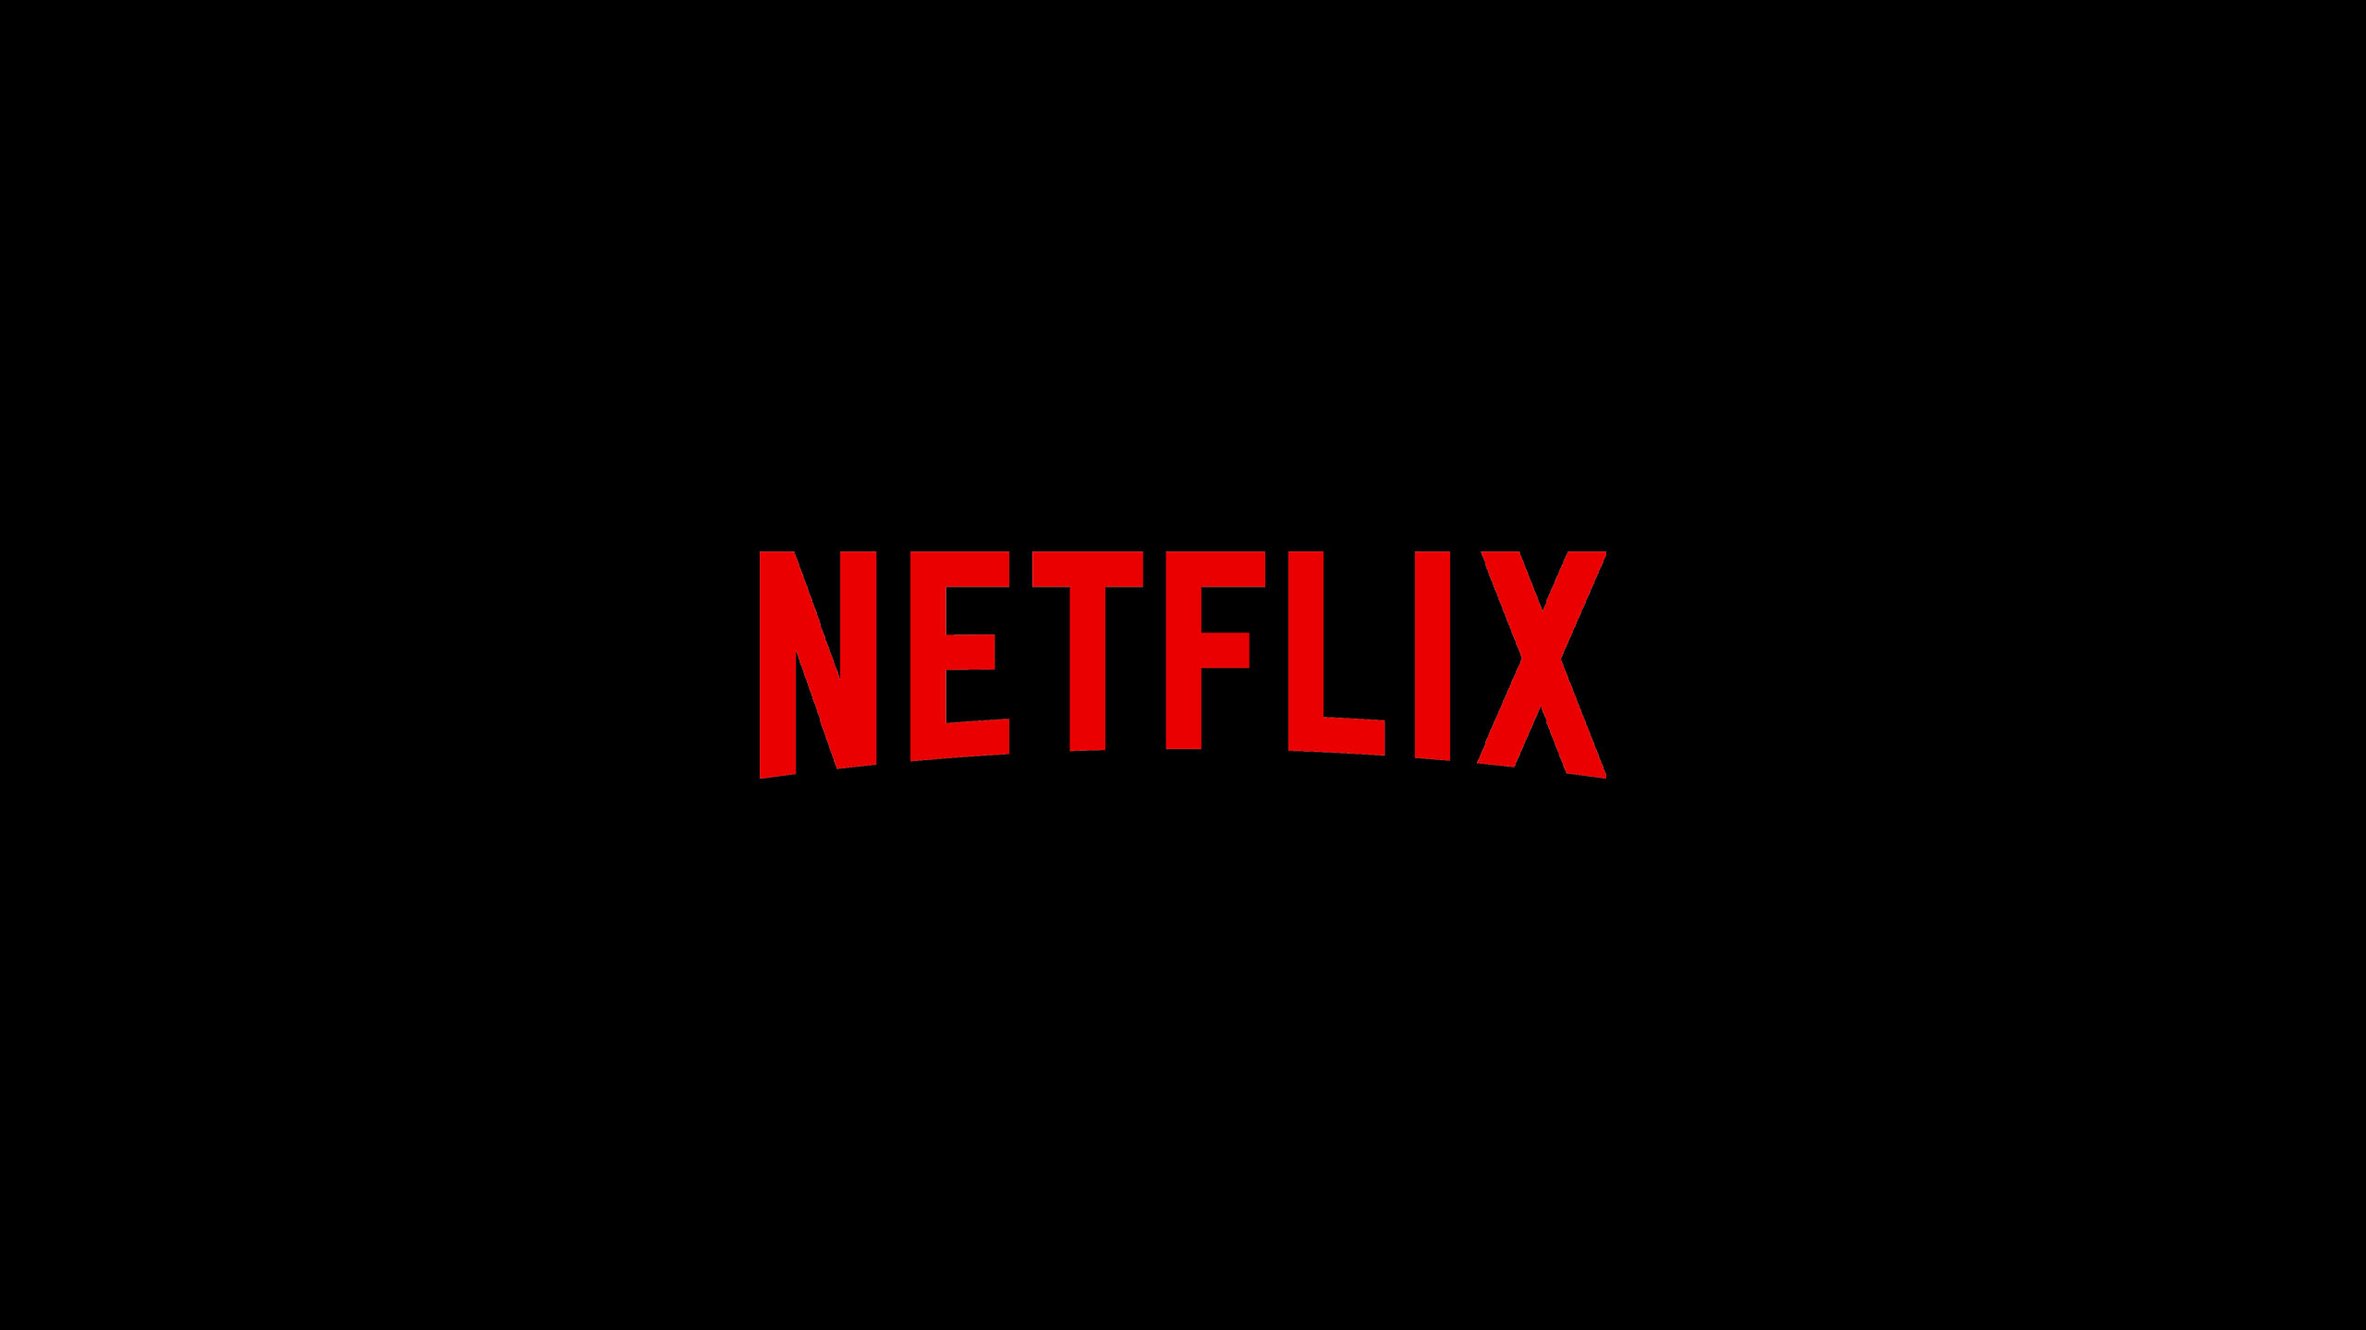 New Netflix Supernatural Series Archive 81 -  Now Casting